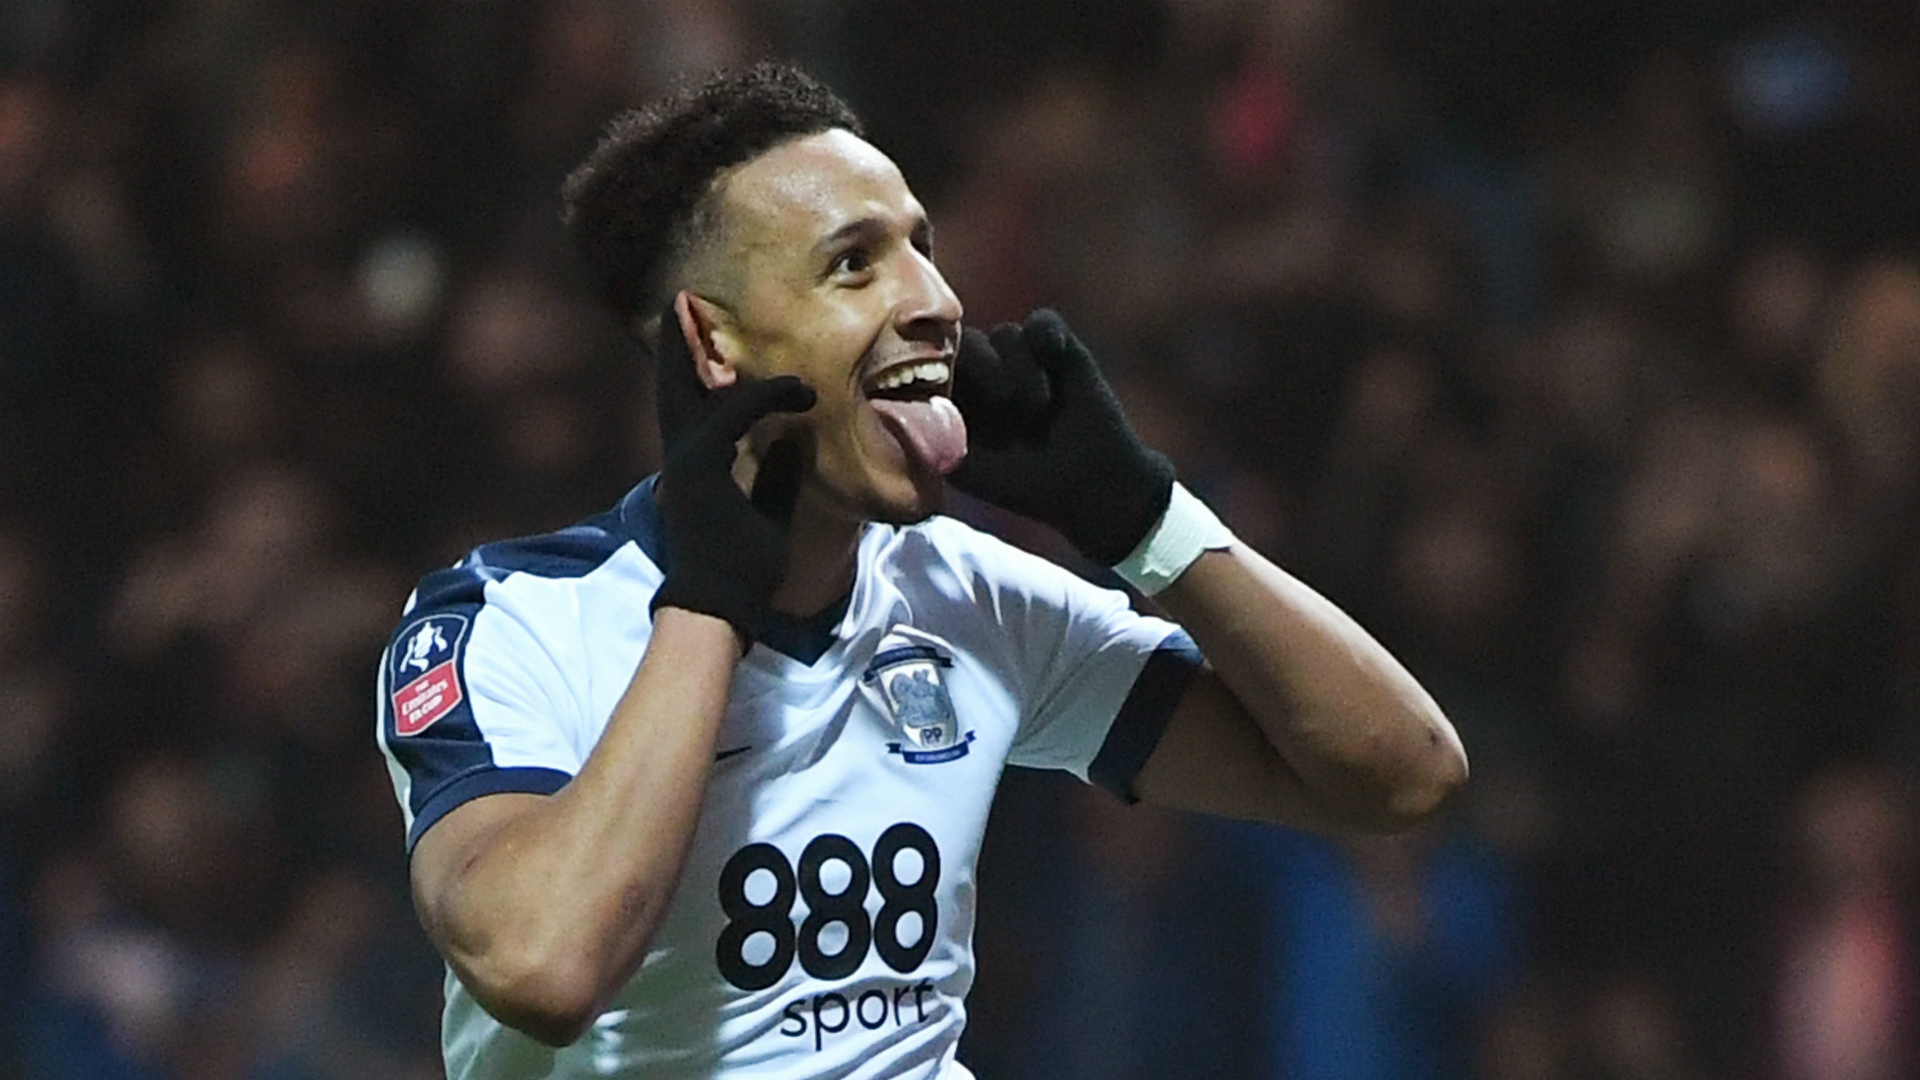 A reported £8million fee has been paid to Preston North End by Sheffield United to snap up Republic of Ireland striker Callum Robinson.